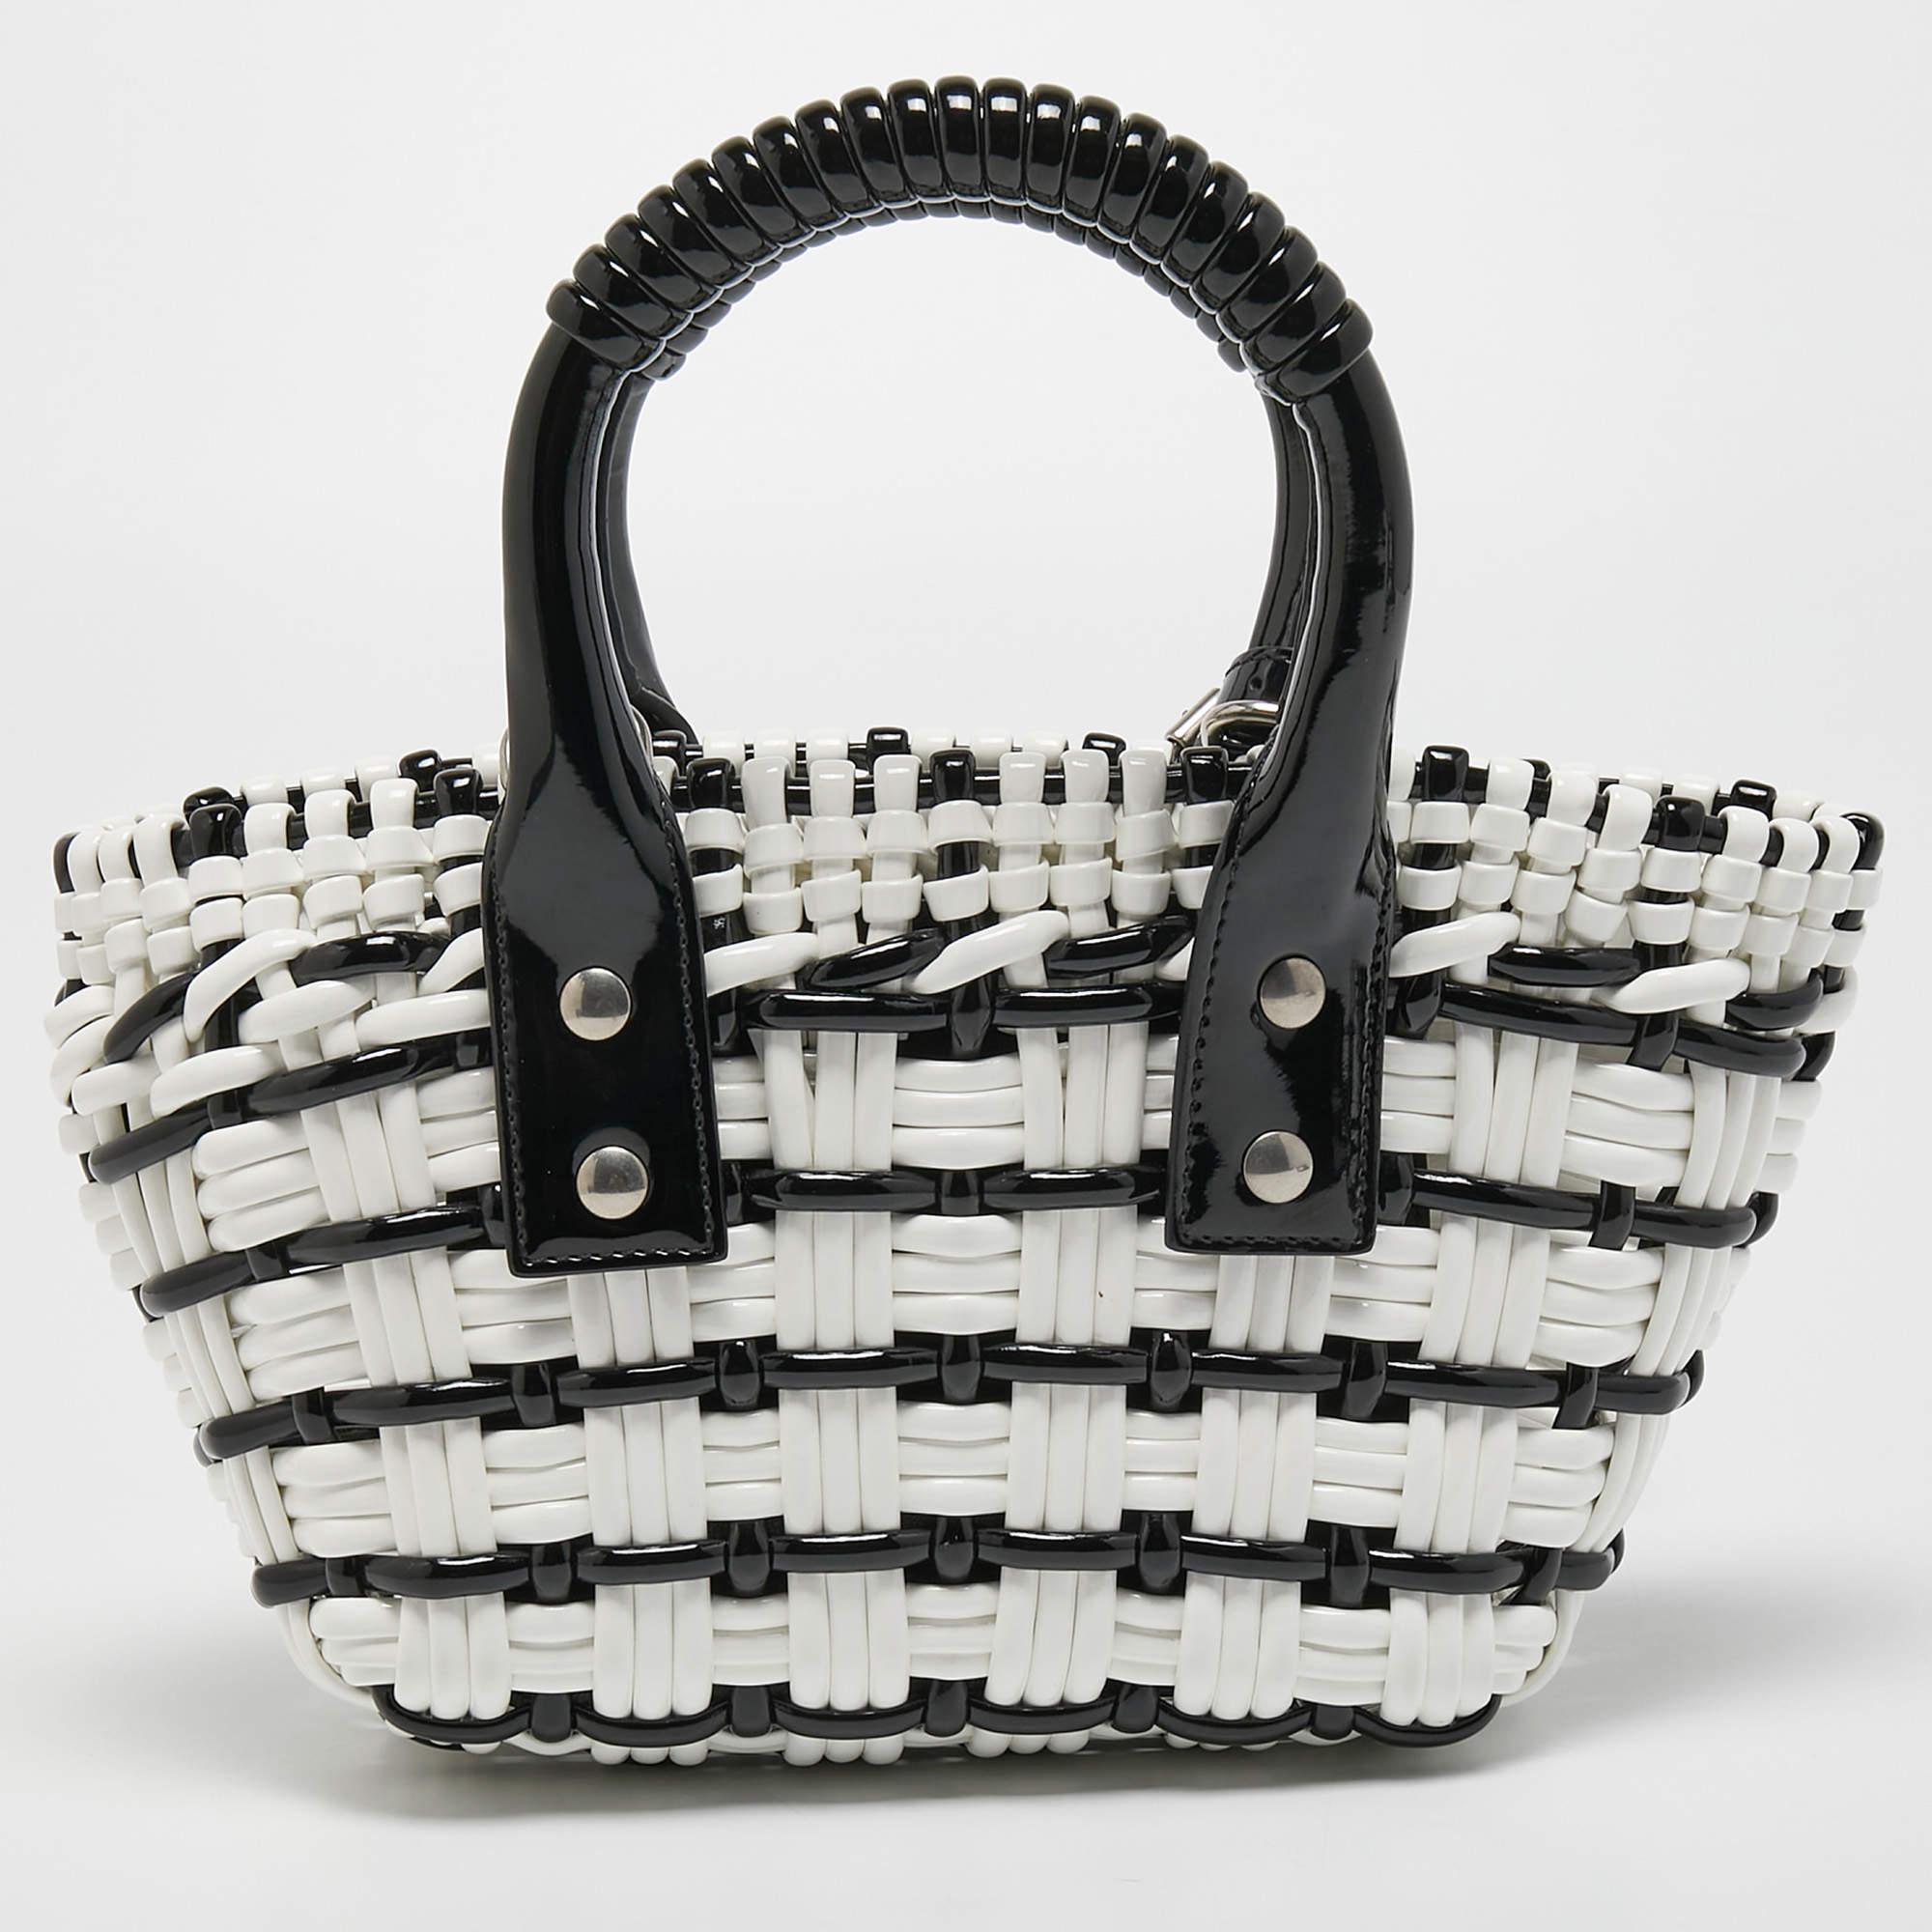 The Balenciaga Bistro tote is a stylish and sophisticated handbag. Made from high-quality patent leather, it features a unique woven design in black and white. The tote has a spacious interior with a zippered pocket and a magnetic closure to keep